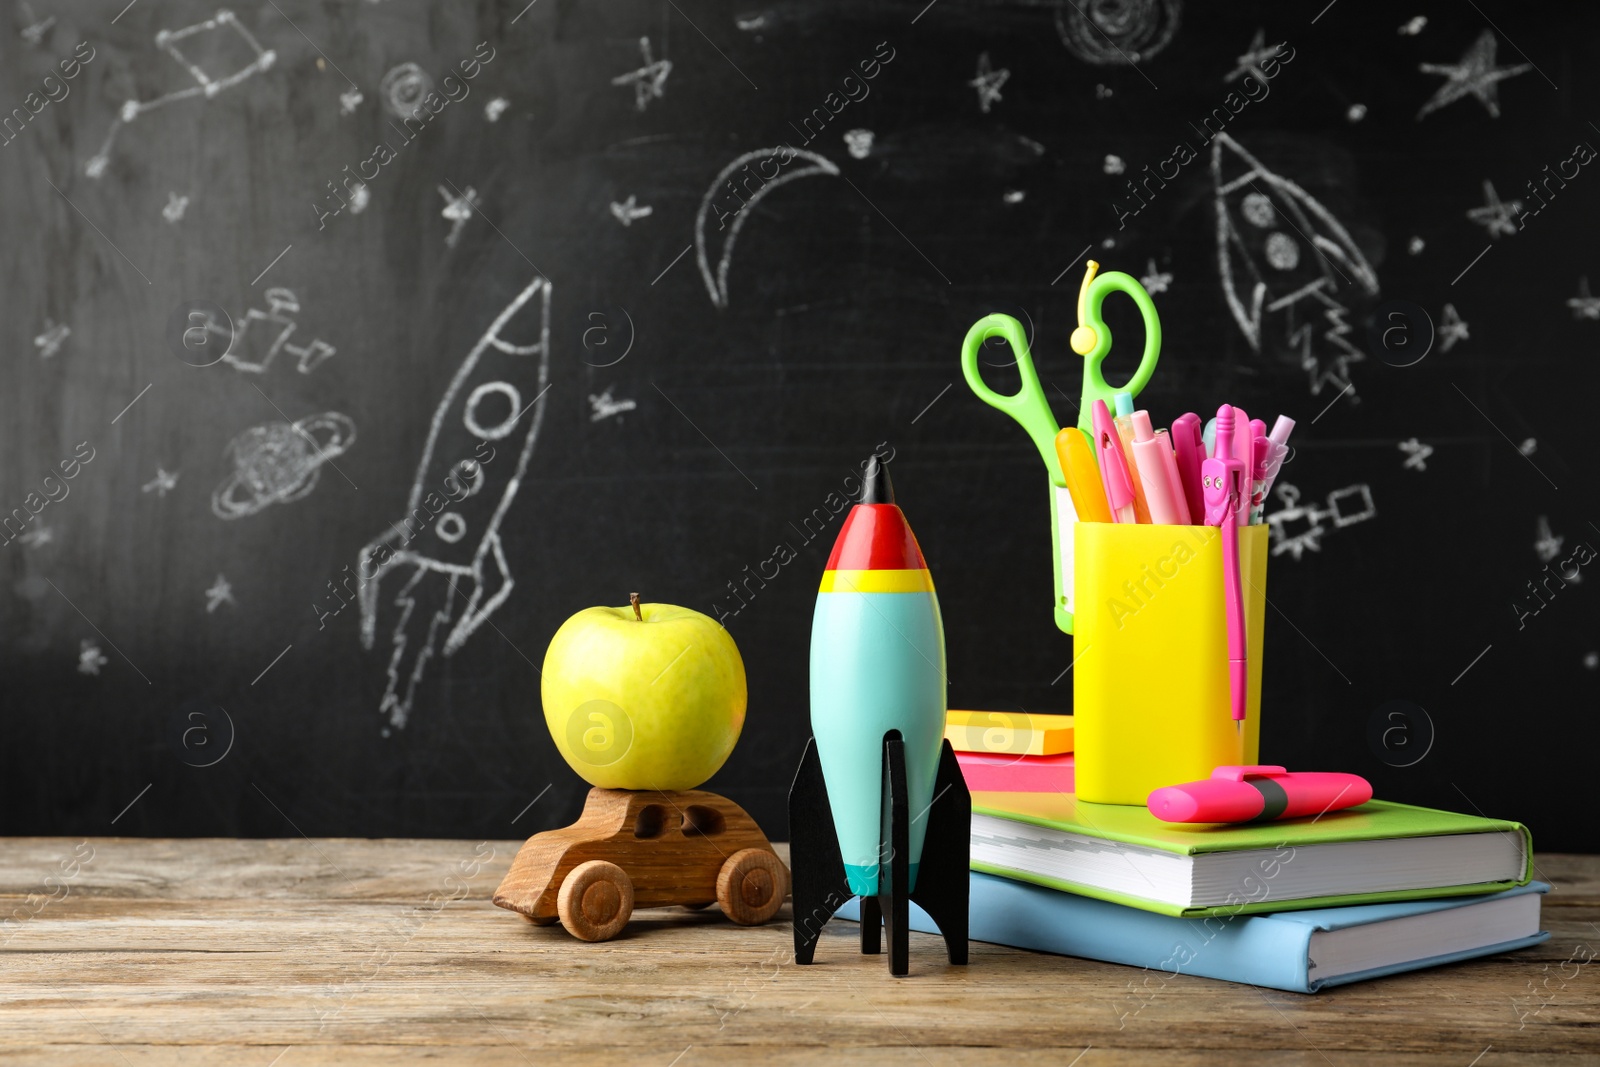 Photo of Bright toy rocket, car and school supplies on wooden table